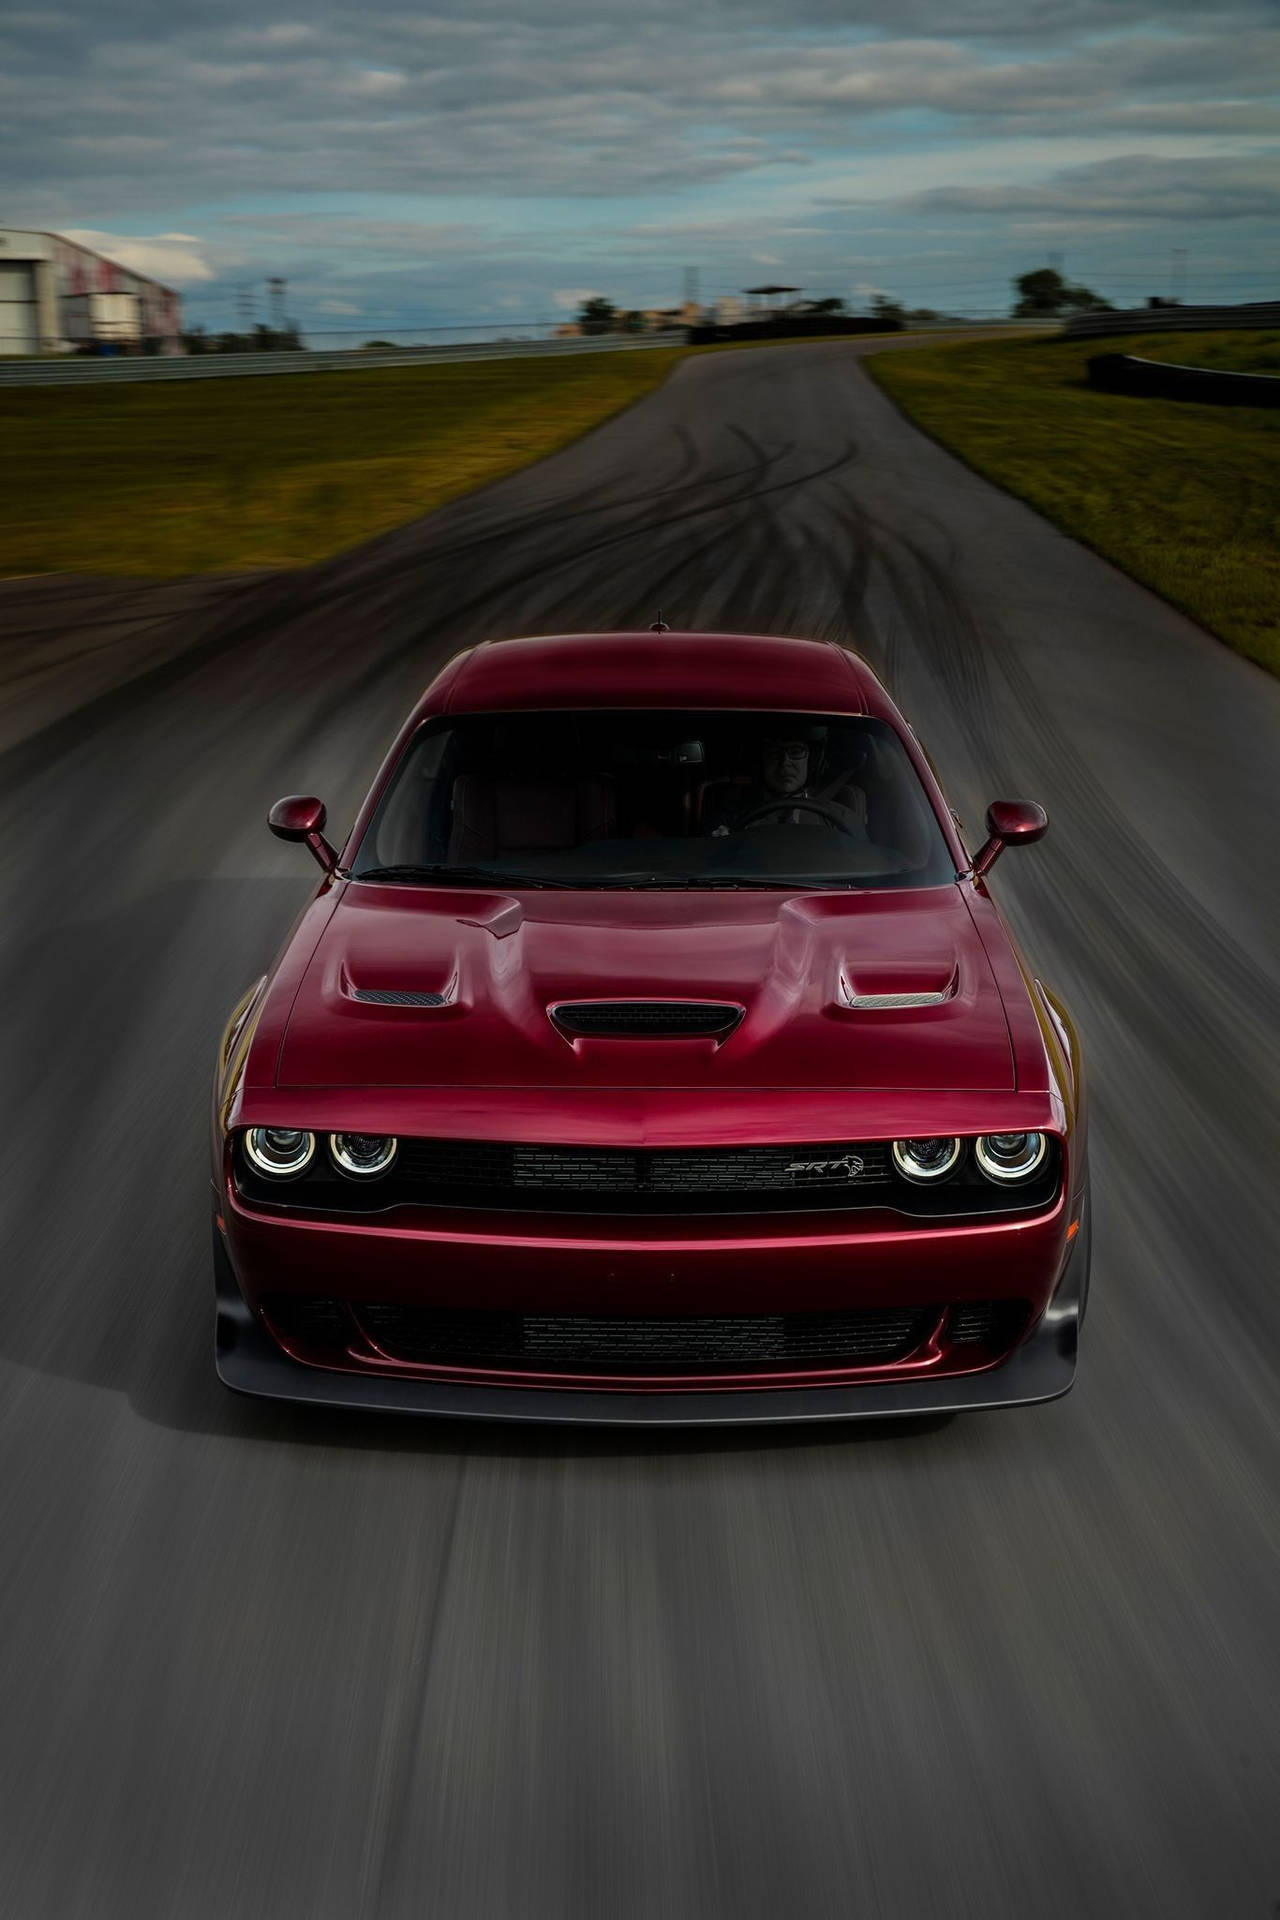 (assuming This Is A Description Of A Wallpaper Featuring A Dodge Challenger Demon In The Color Octane Red) Wallpaper